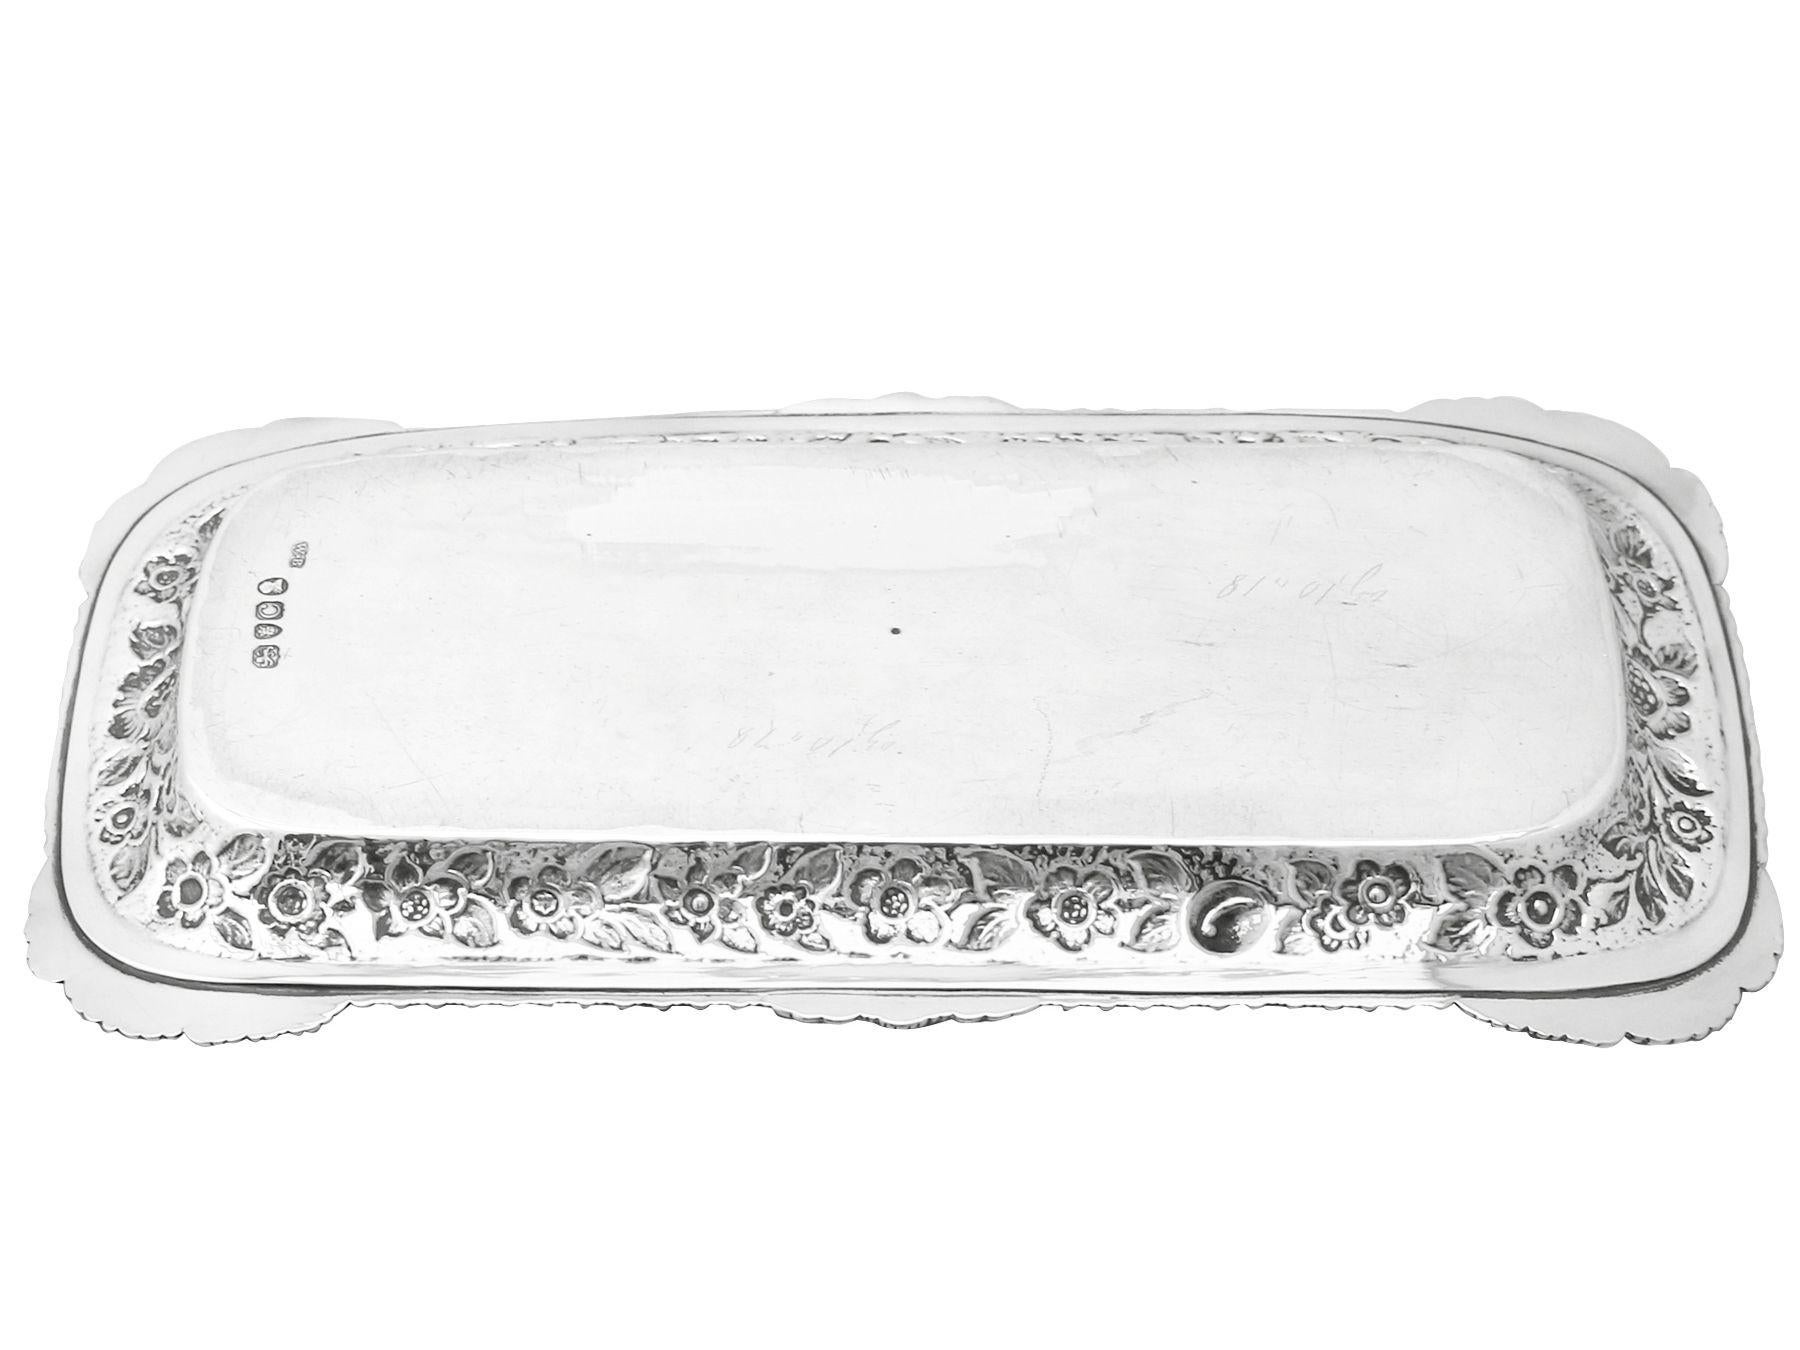 William Bateman I Antique English Sterling Silver Snuffer / Pen Tray For Sale 1